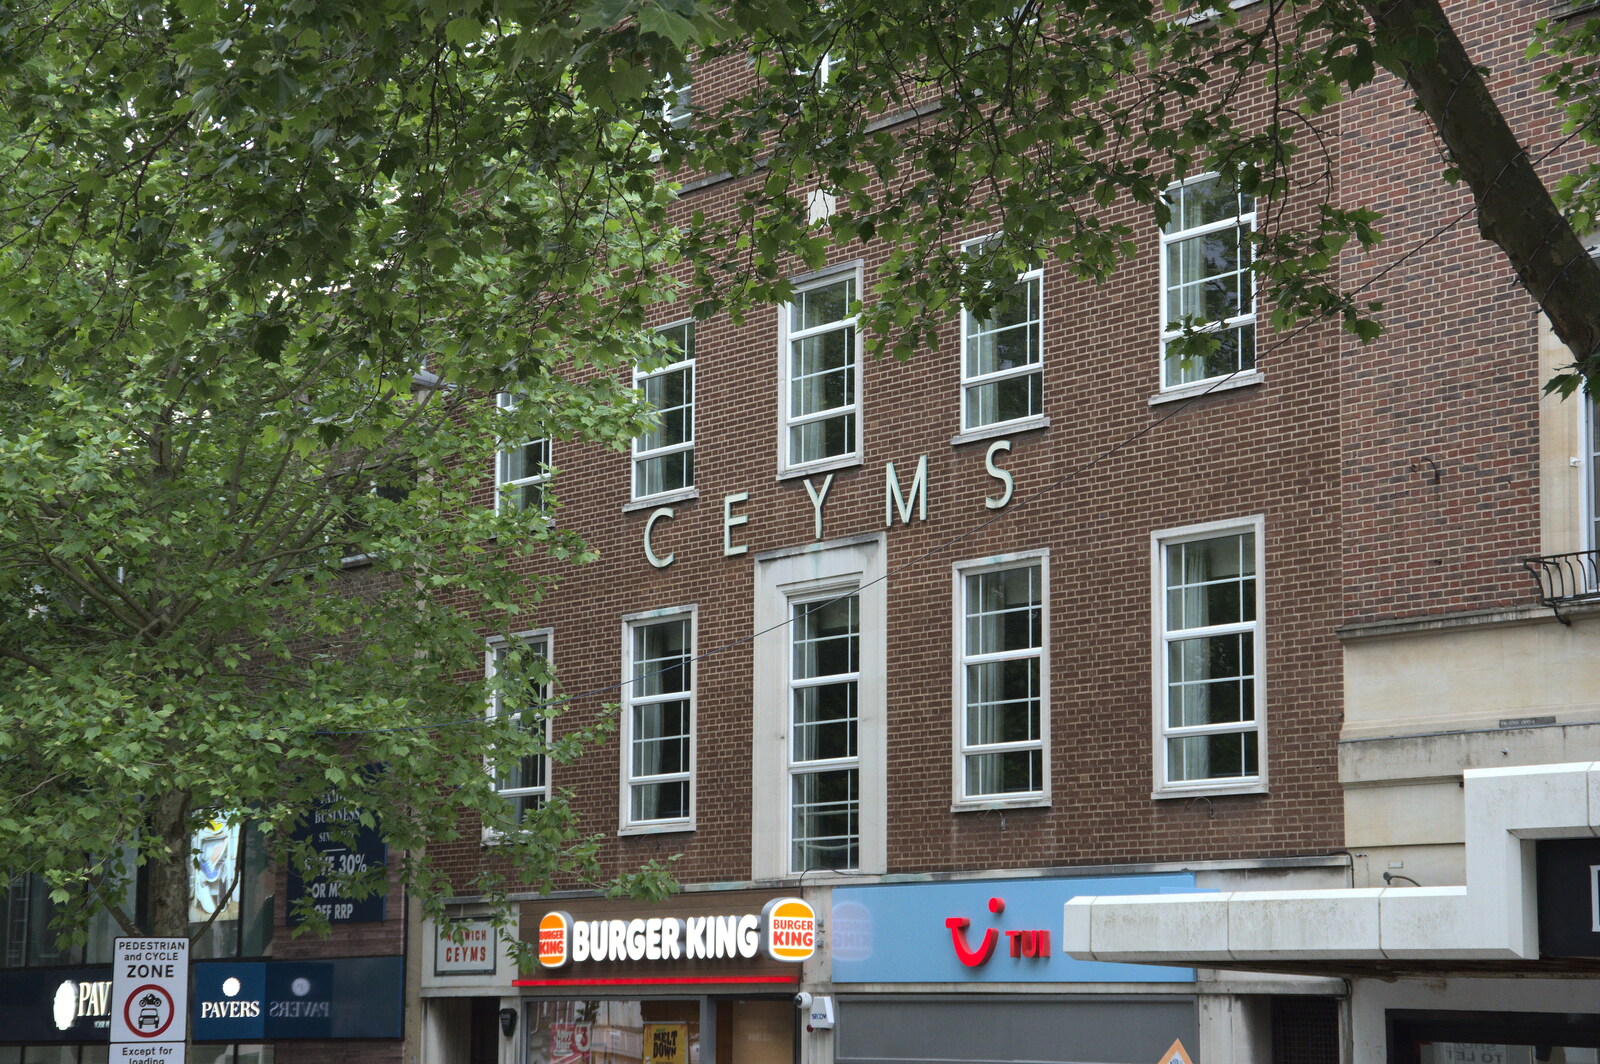 The now-defunct CEYMS building on Haymarket from Discovering the Hidden City: Norwich, Norfolk - 23rd May 2022